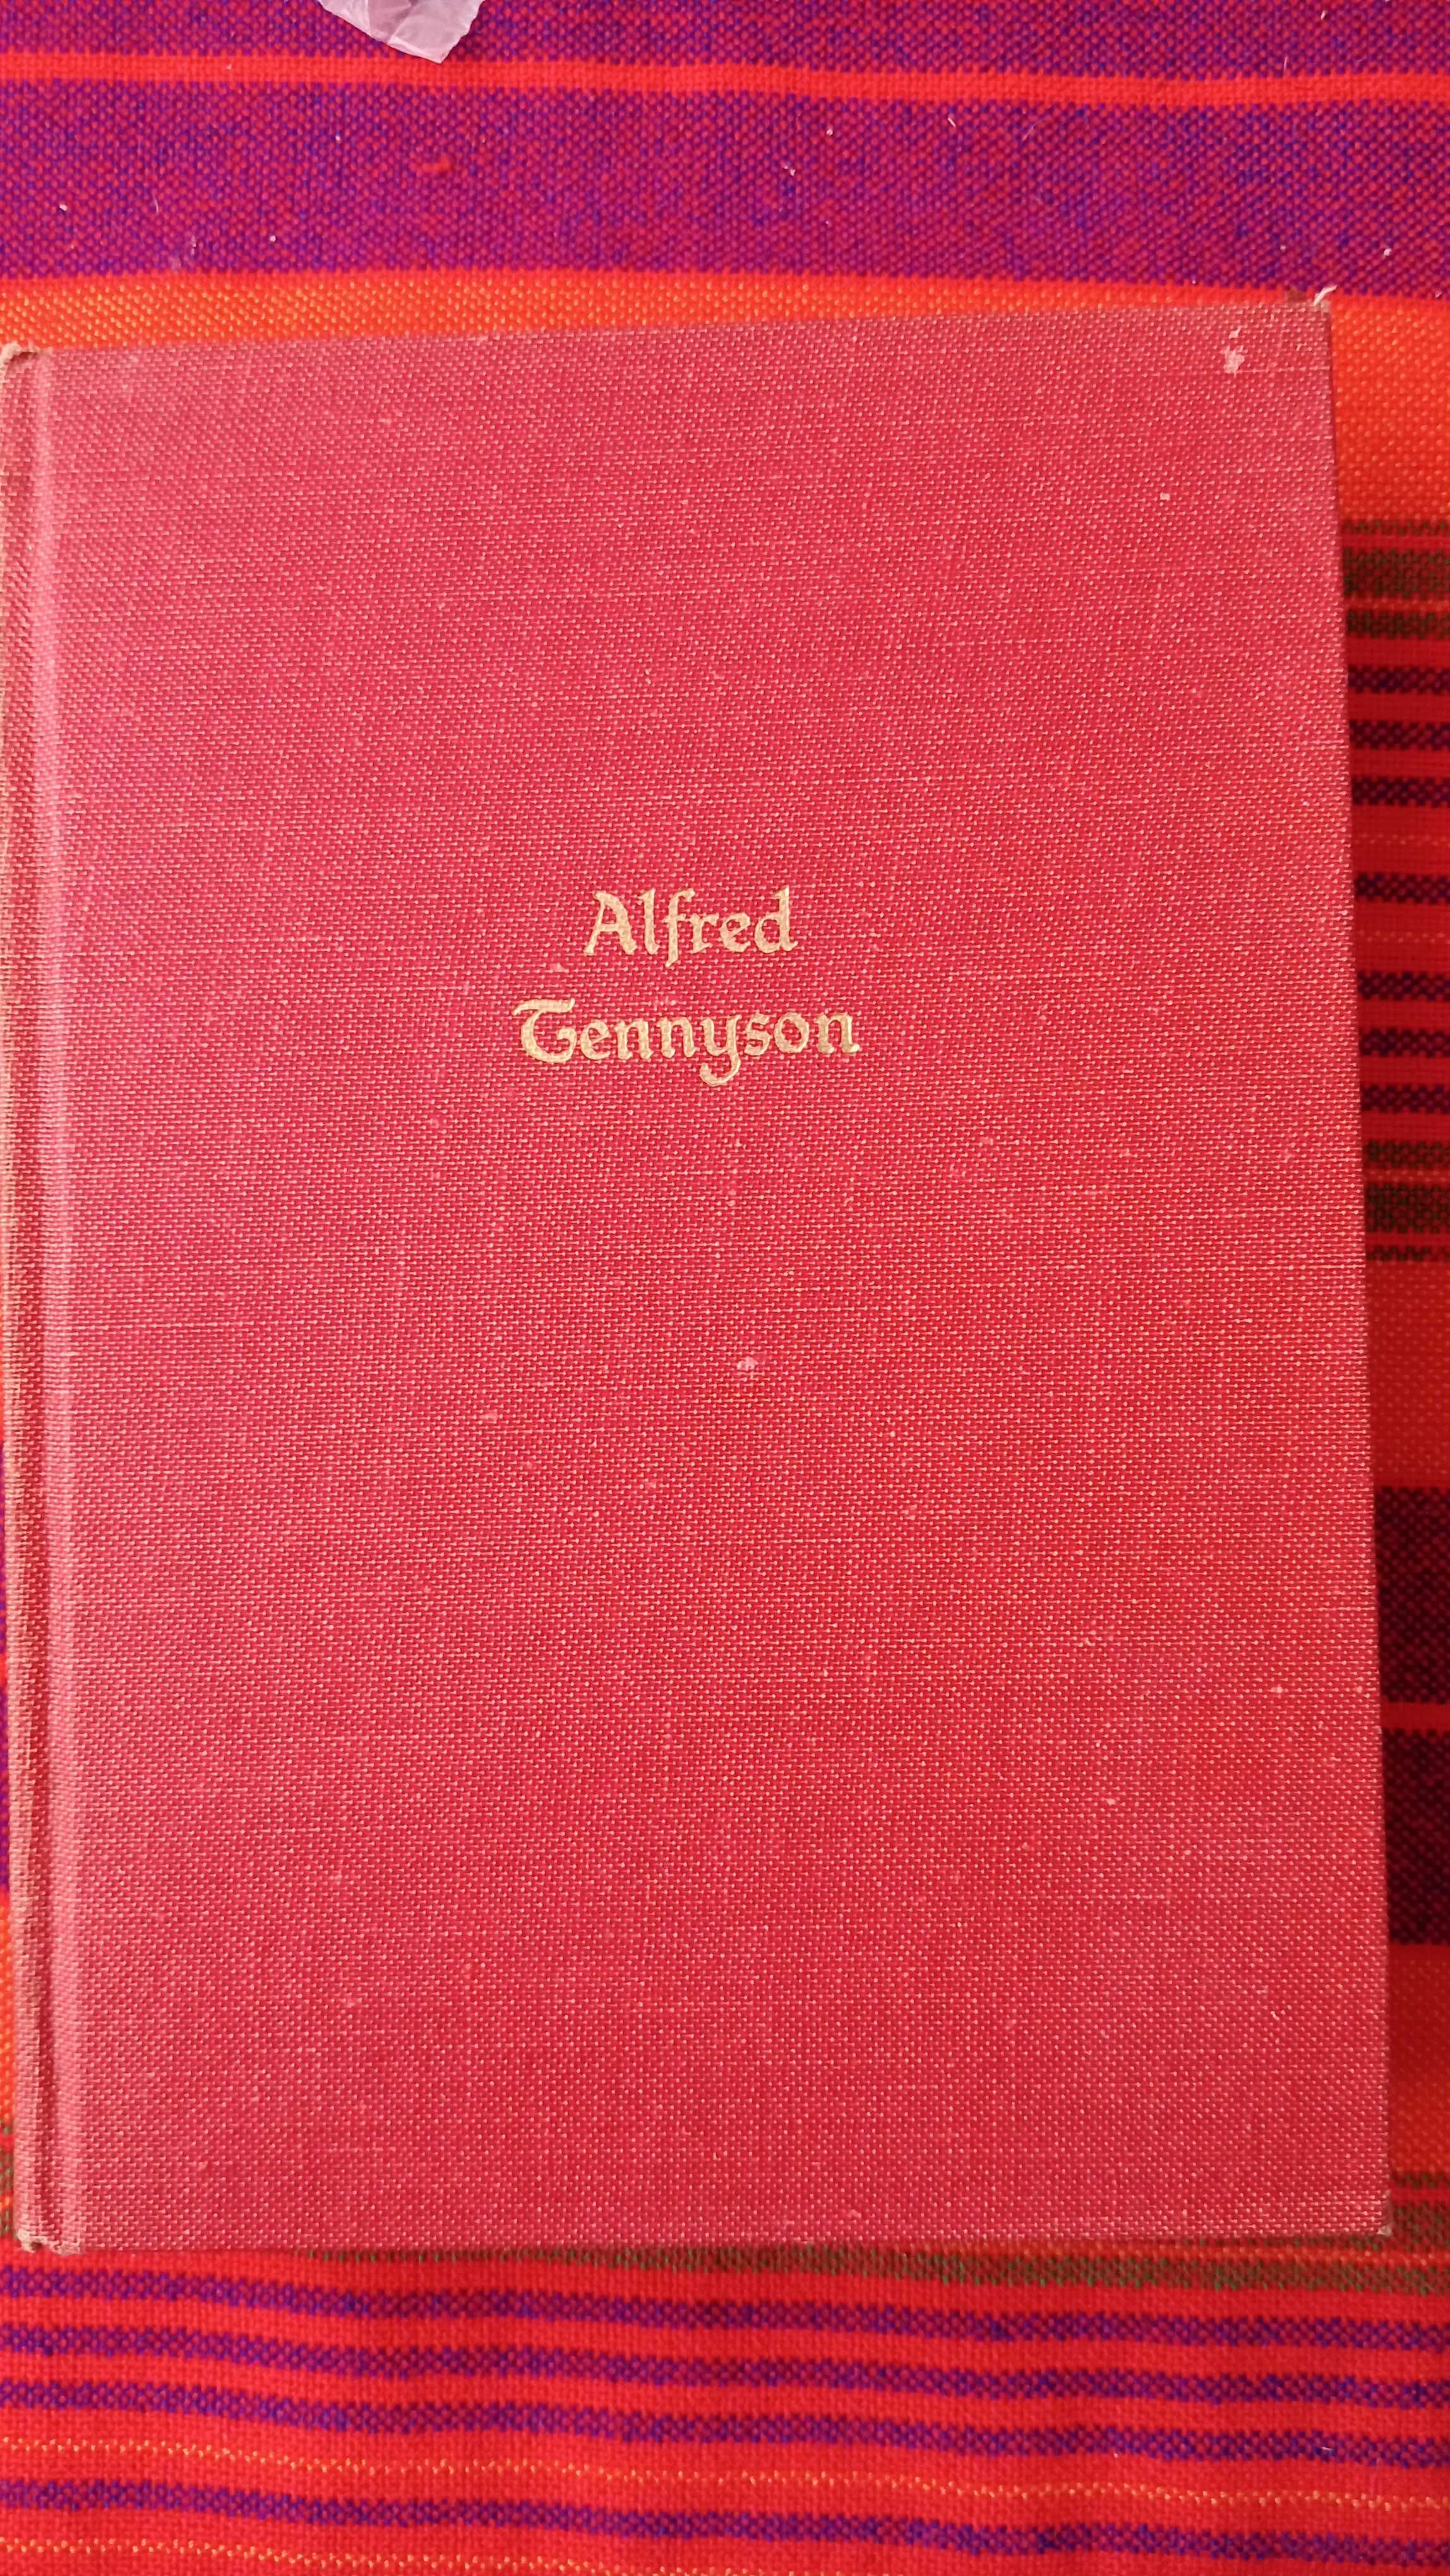 The poems of Alfred Lord Tennyson